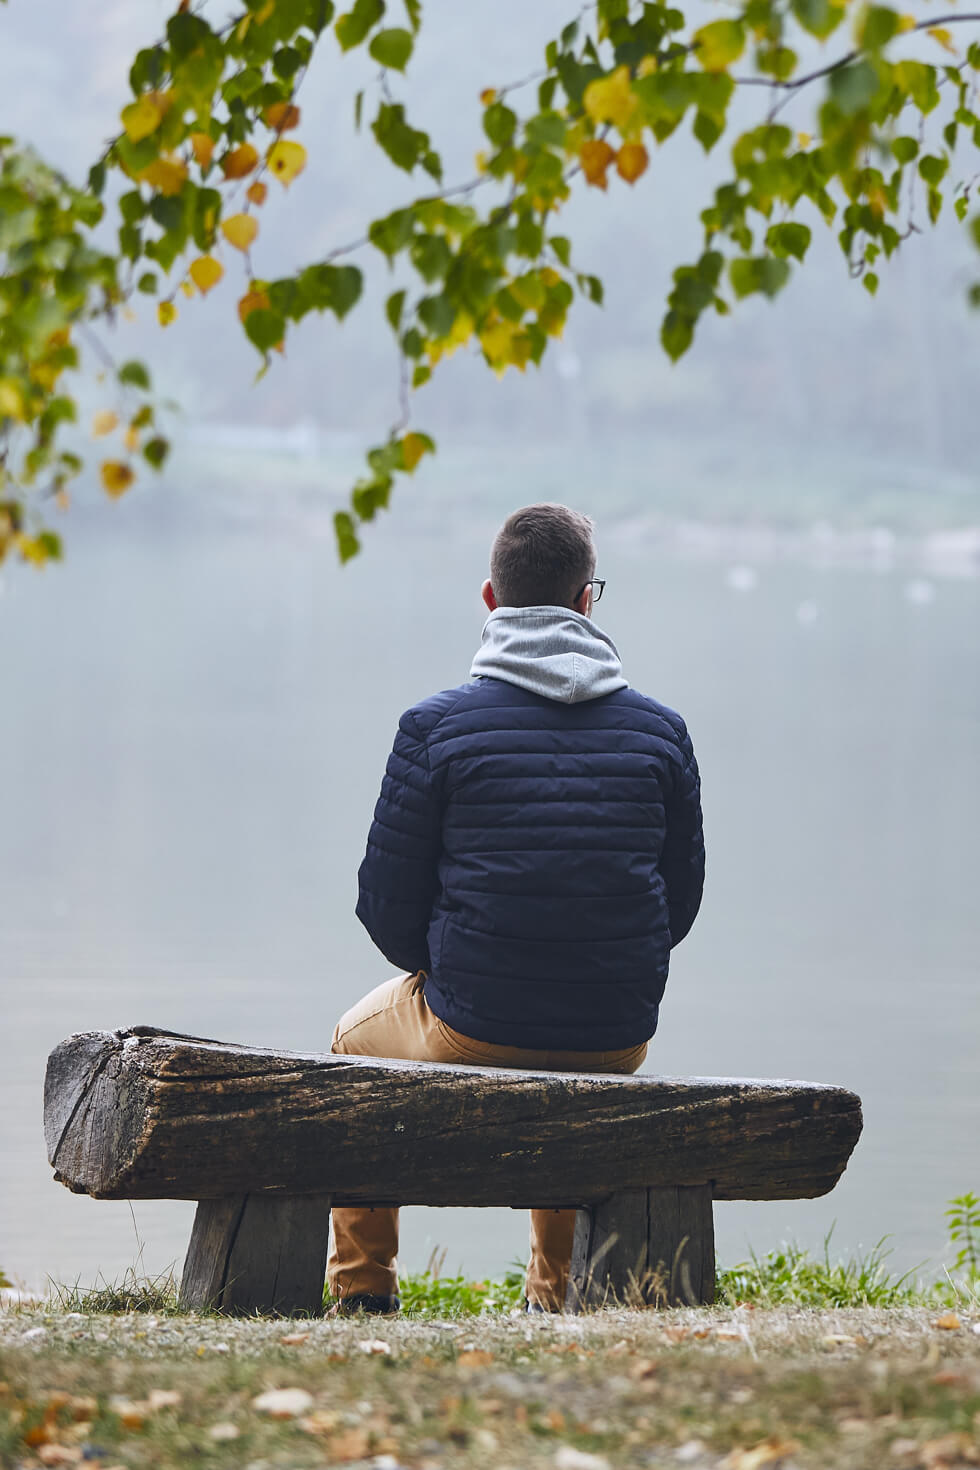 Grieving man sits on bench overlooking the water.